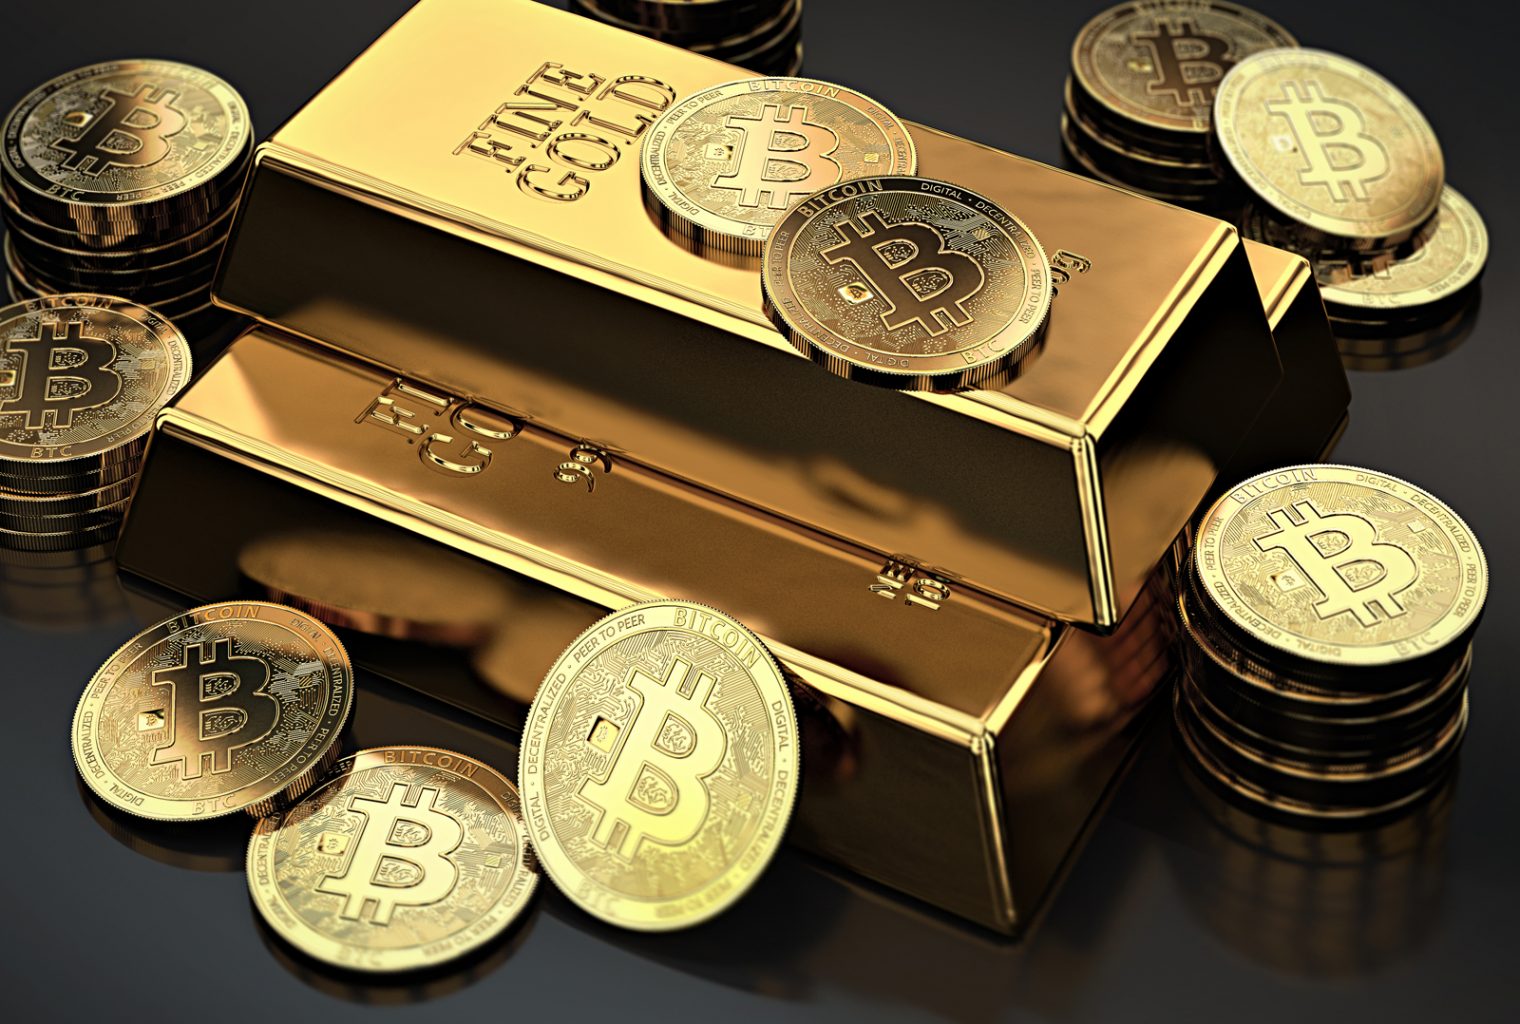 59% of Twitter Users Prefer Bitcoin over Gold